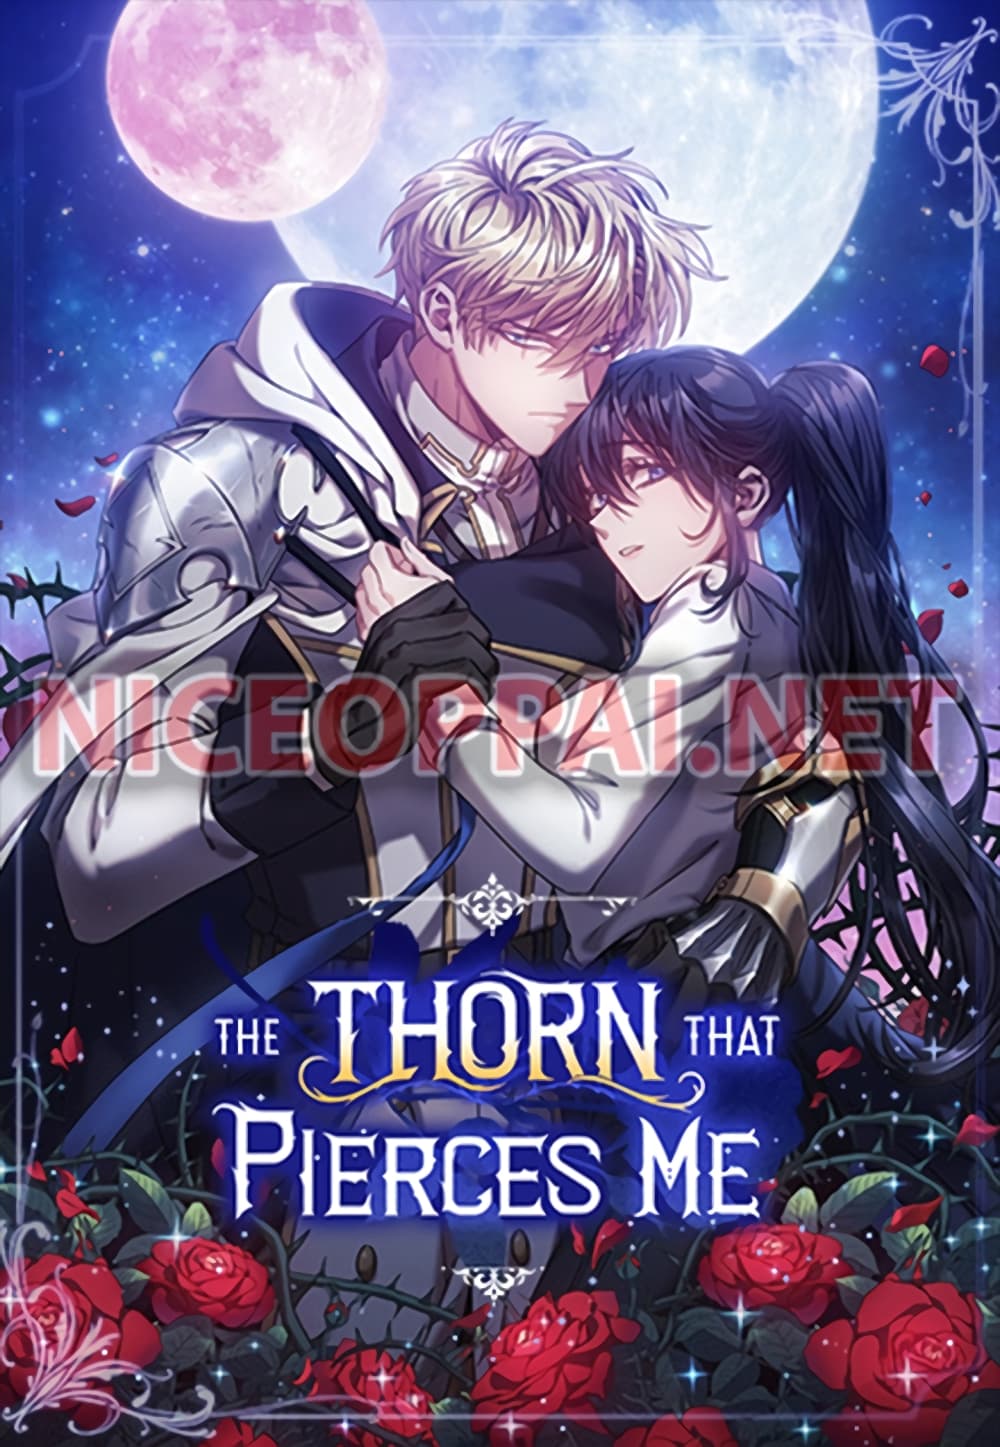 The Thorn That Pierces Me 9 (1)